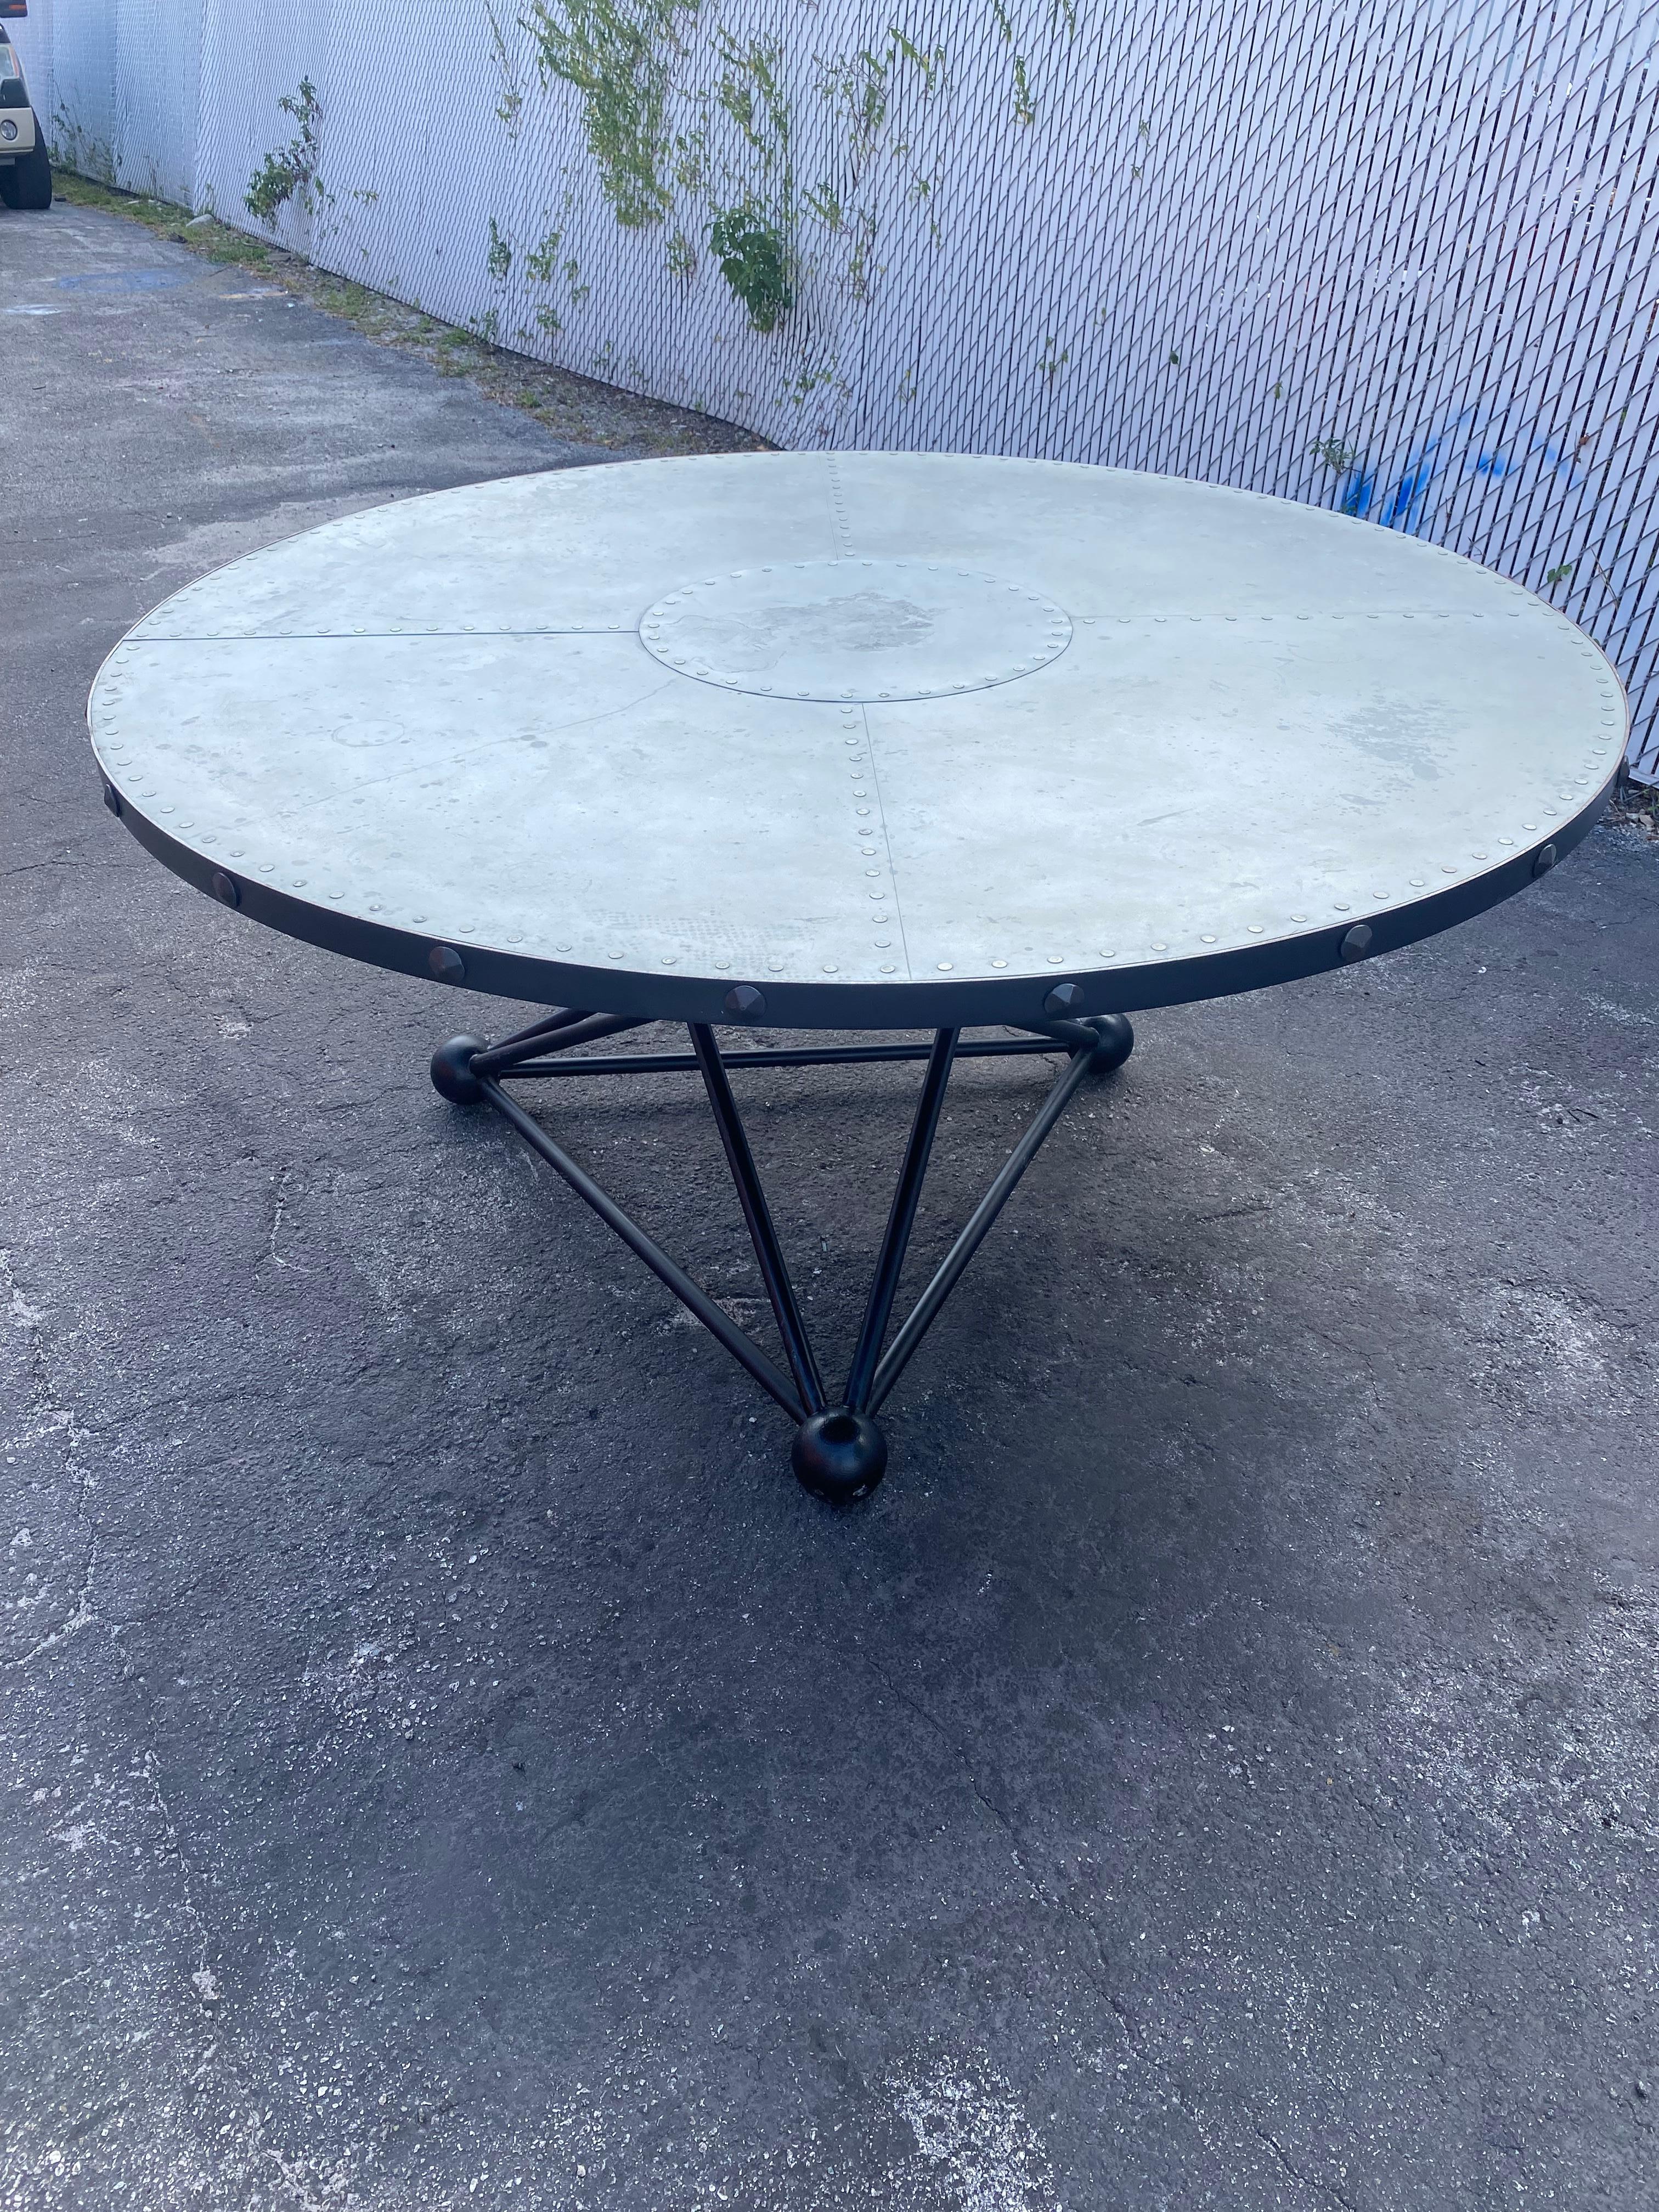 1980s Industrial Geometrical Sculptural Steel Zinc Wood Round Dining Table For Sale 2